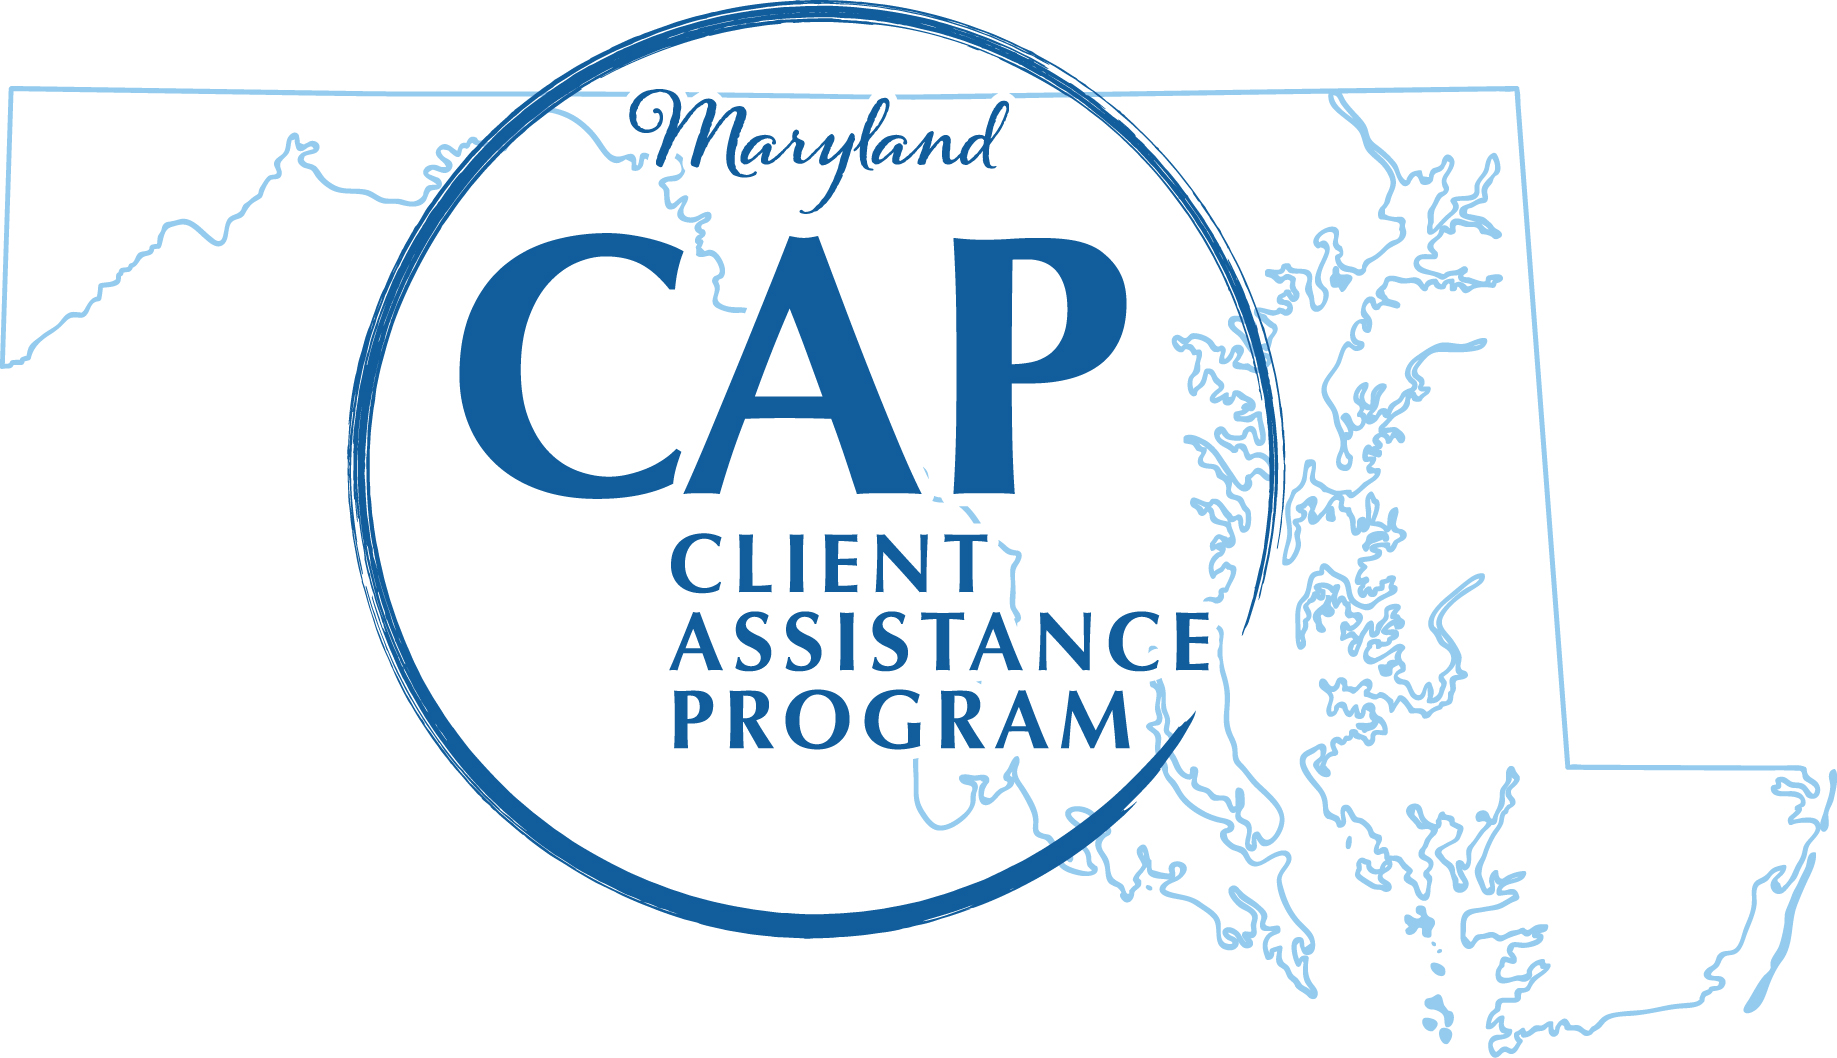 Client Assistance Program logo: A blue circle over a blue outline of the State of Maryland.